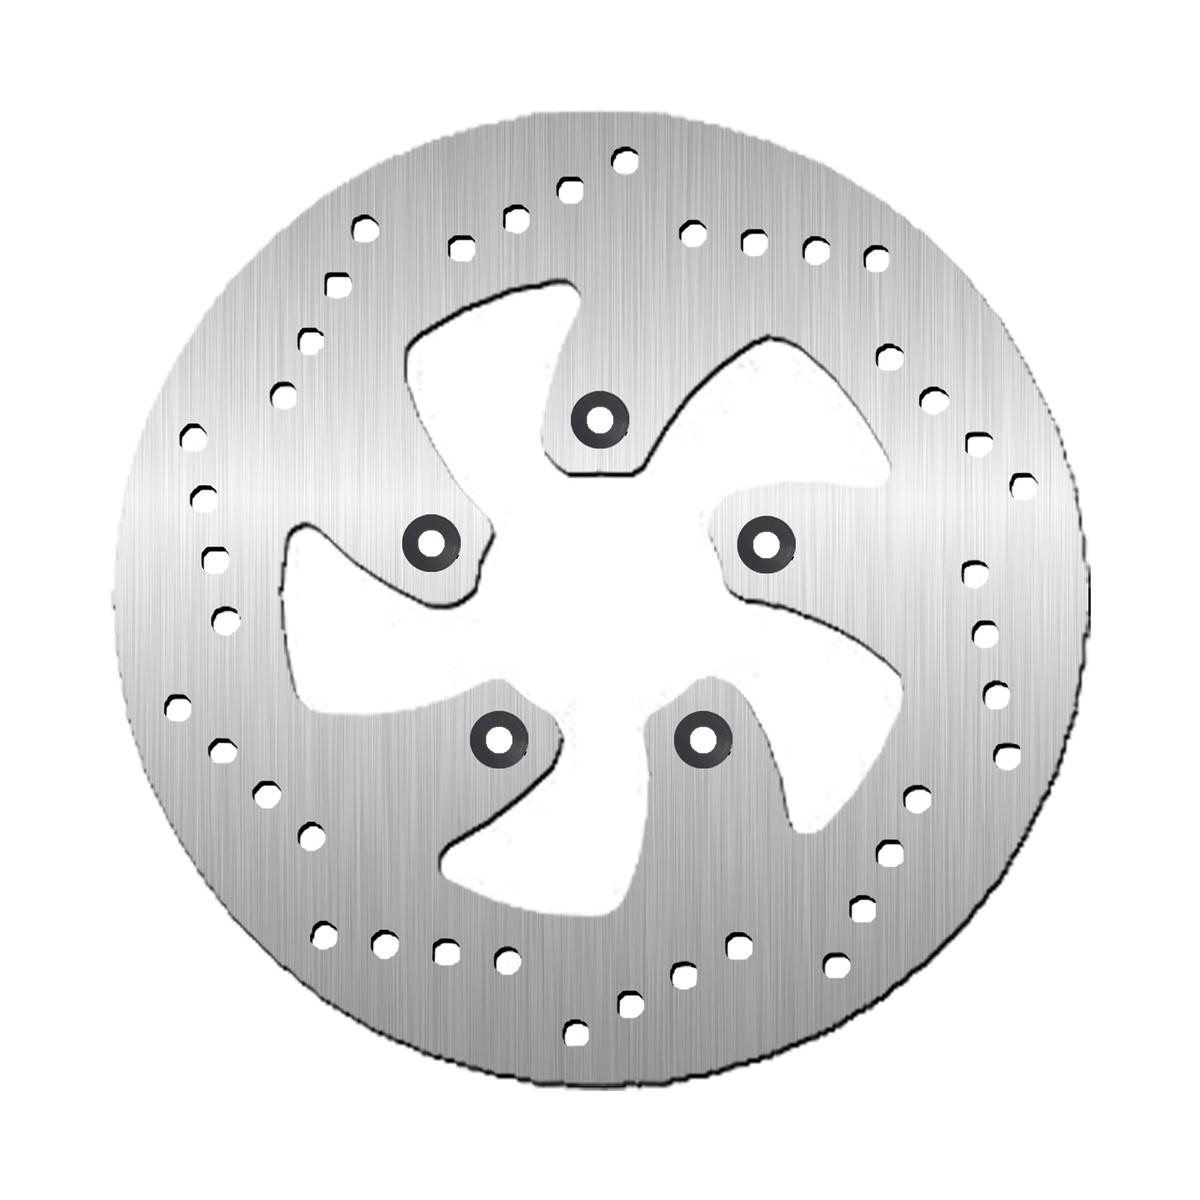 NG 291 Brake disc cheap in online store